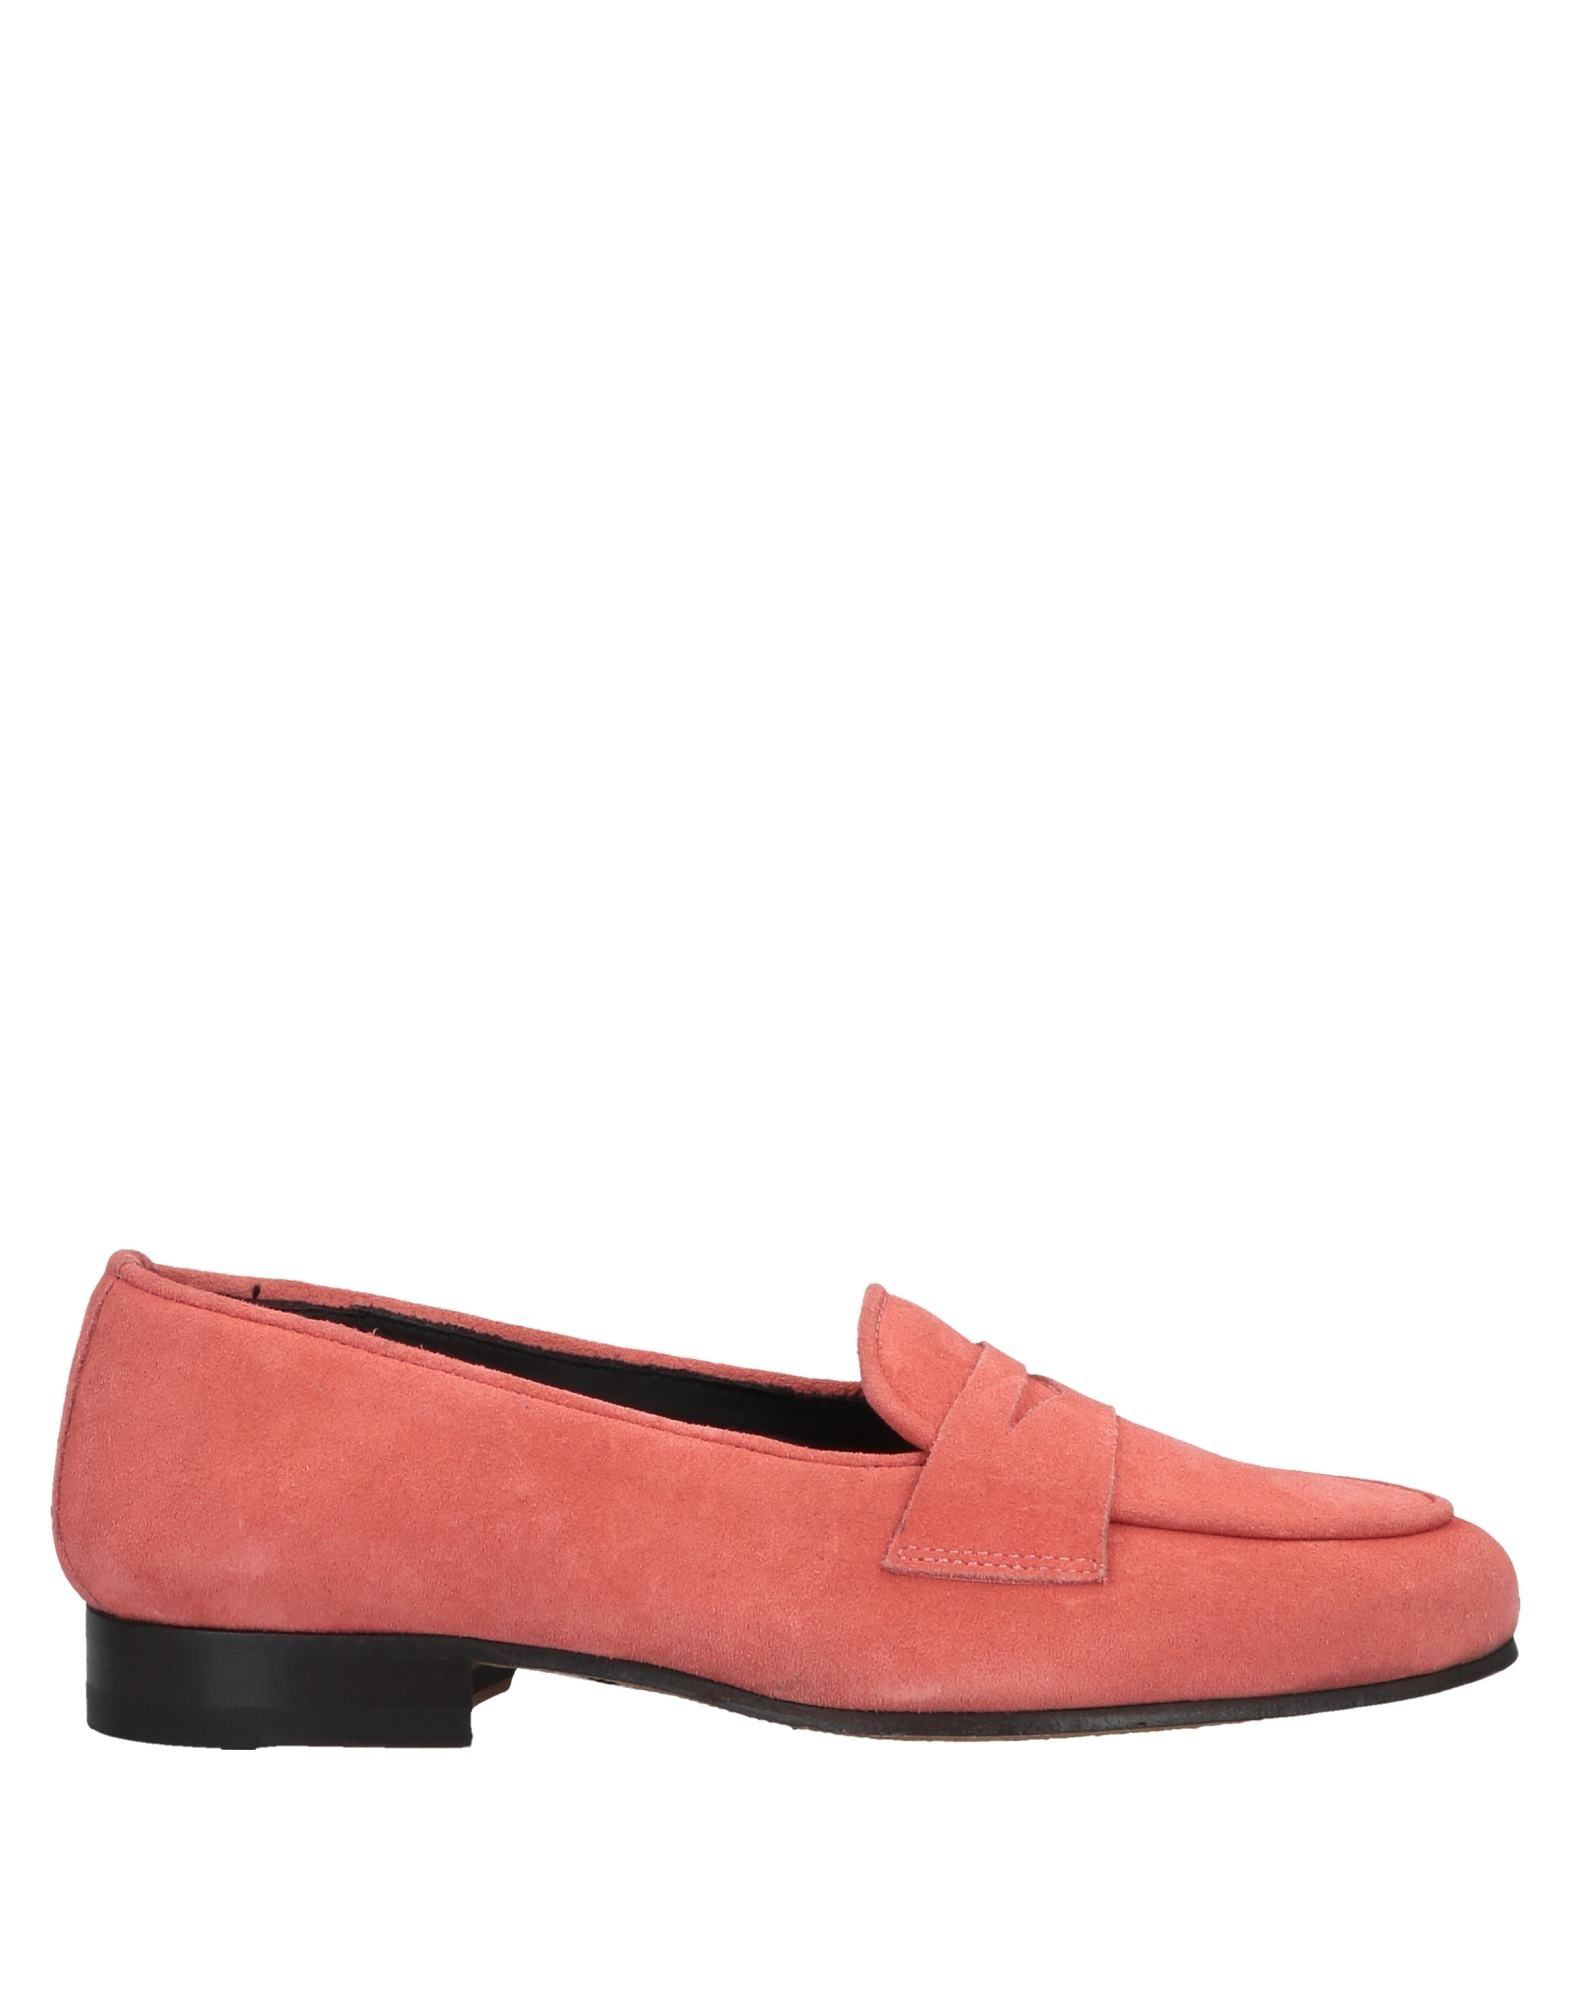 salmon pink loafers